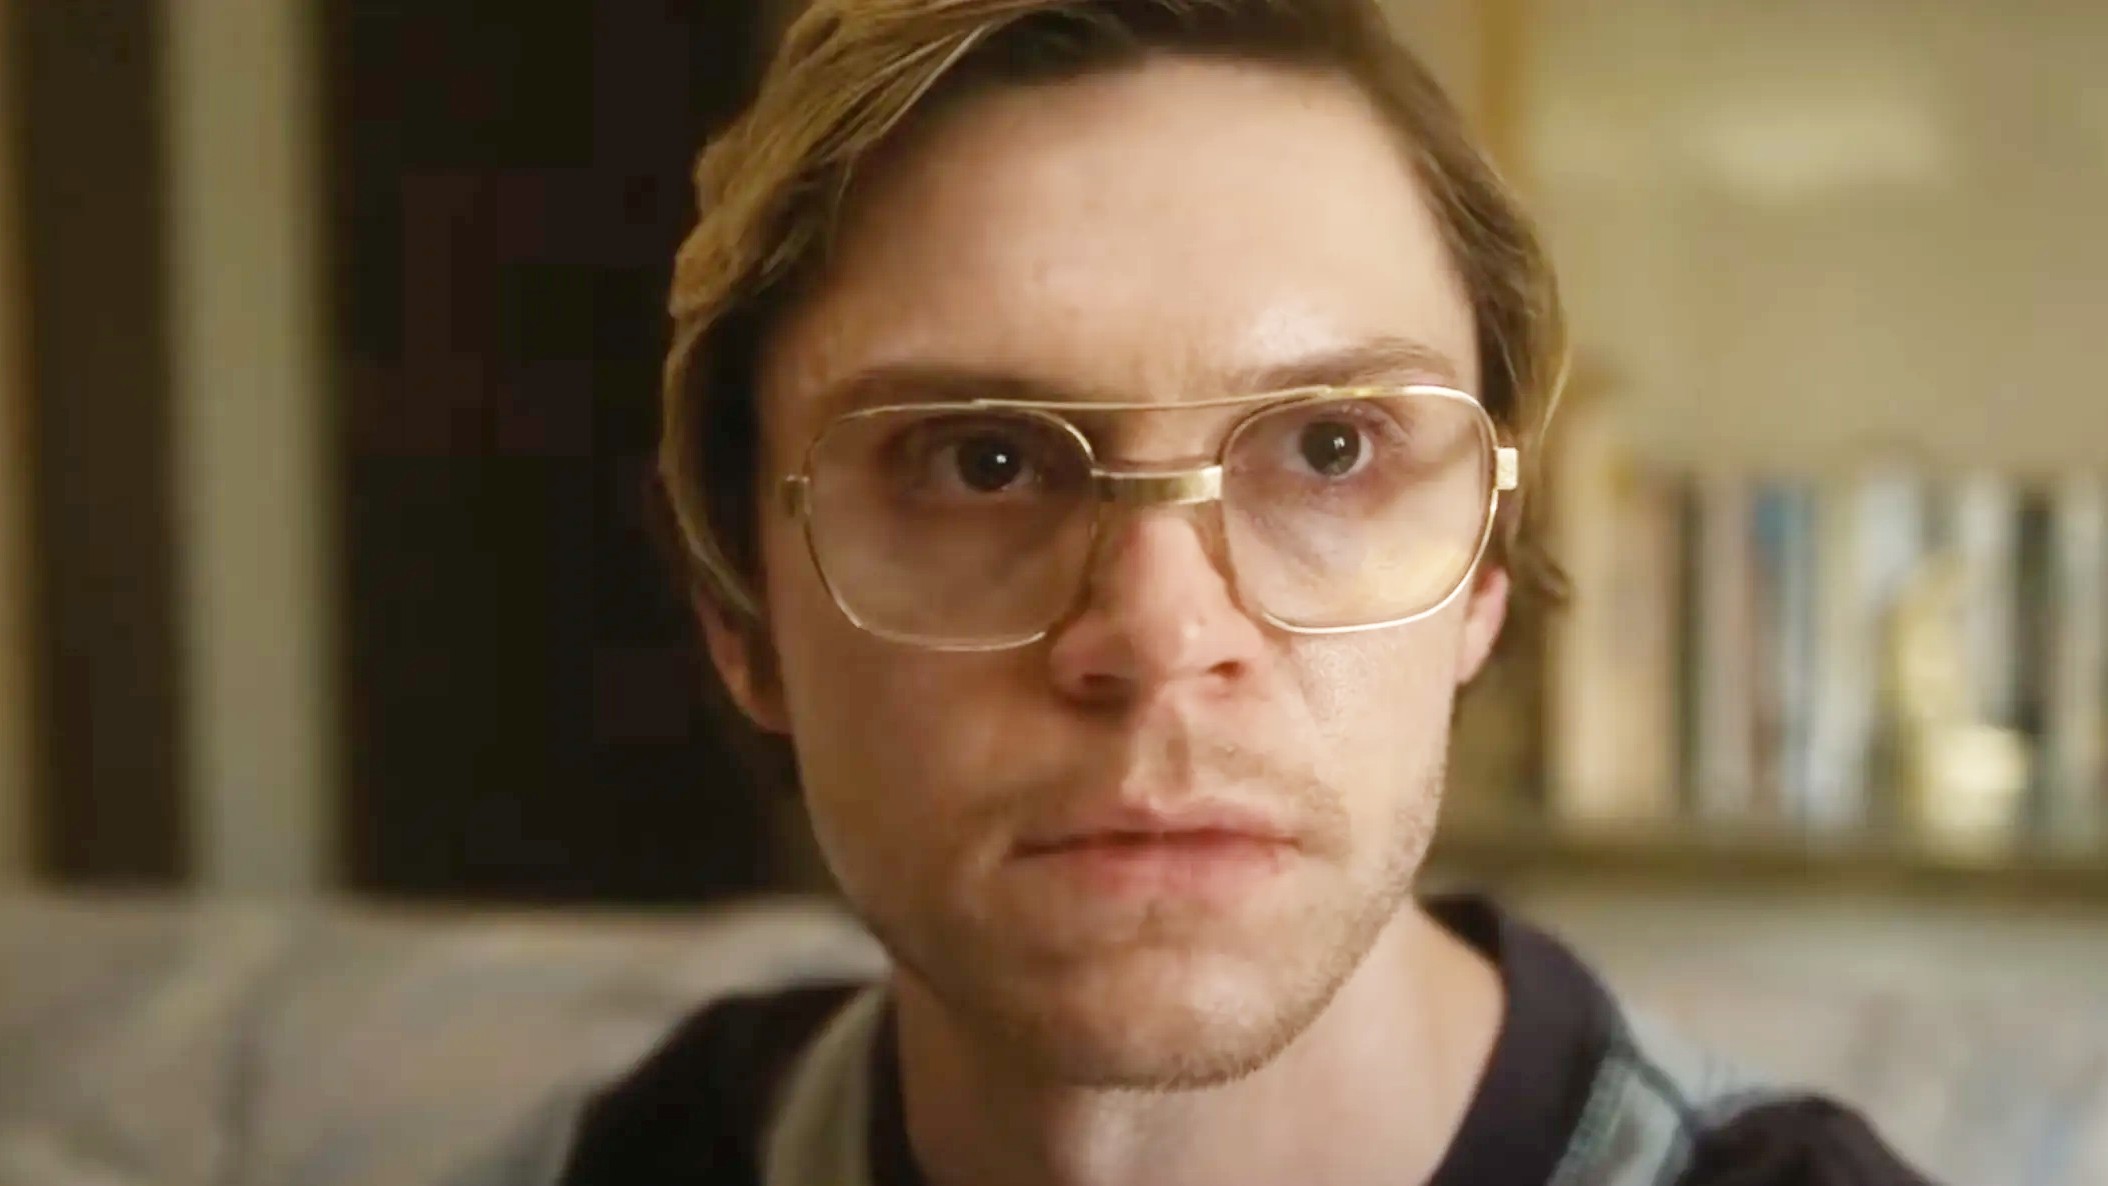 Jeffrey Dahmer Costumes Are Being Banned From Online Retailers